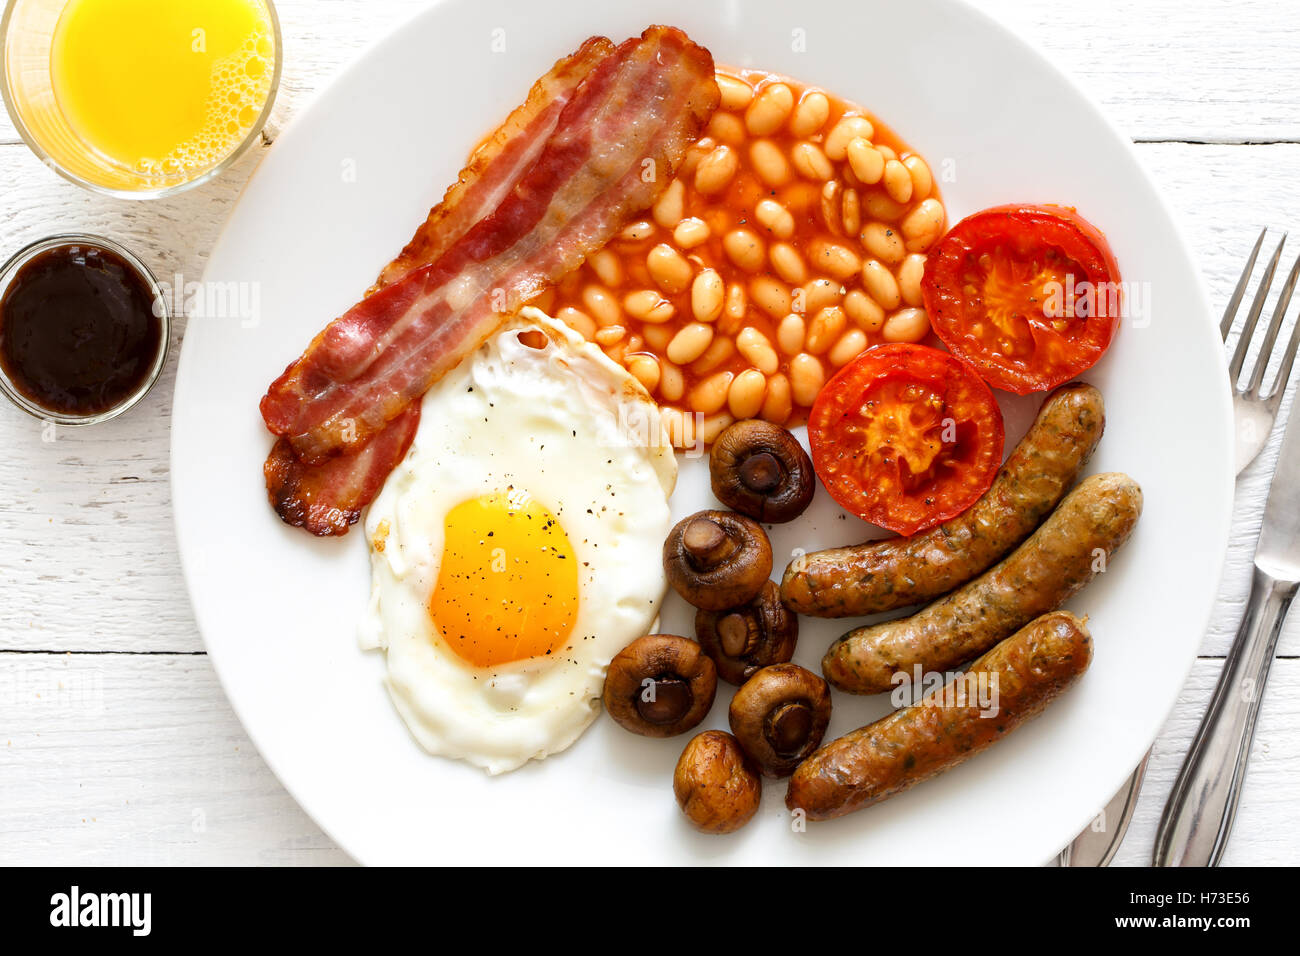 Plate of traditional fried English breakfast with orange juice from above  Stock Photo - Alamy